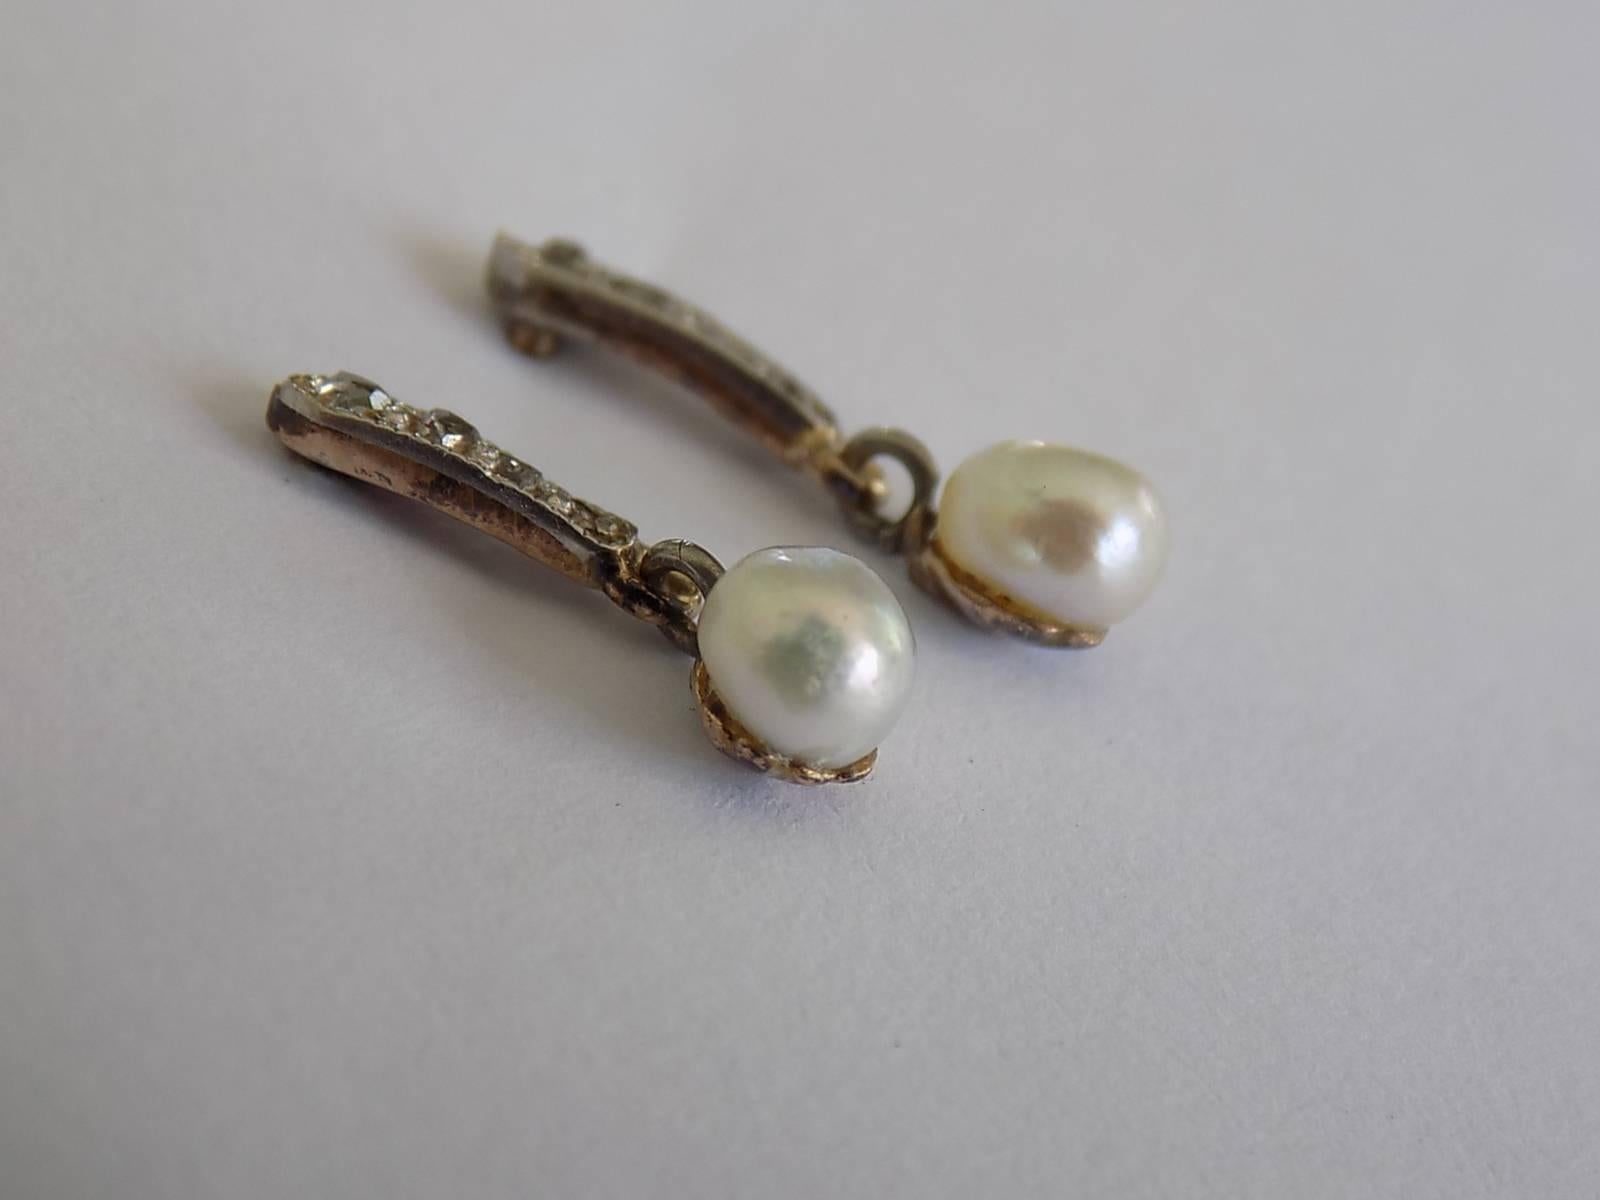 A Lovely Edwardian c.1900 Gold, Rose cut Diamond and Seed Pearl drop earrings. Earrings with a screw posts and backs for pierced ears.
Total drop 15mm.
Width of the pearl 4mm.
Weight 1.2gr.
Unmarked.